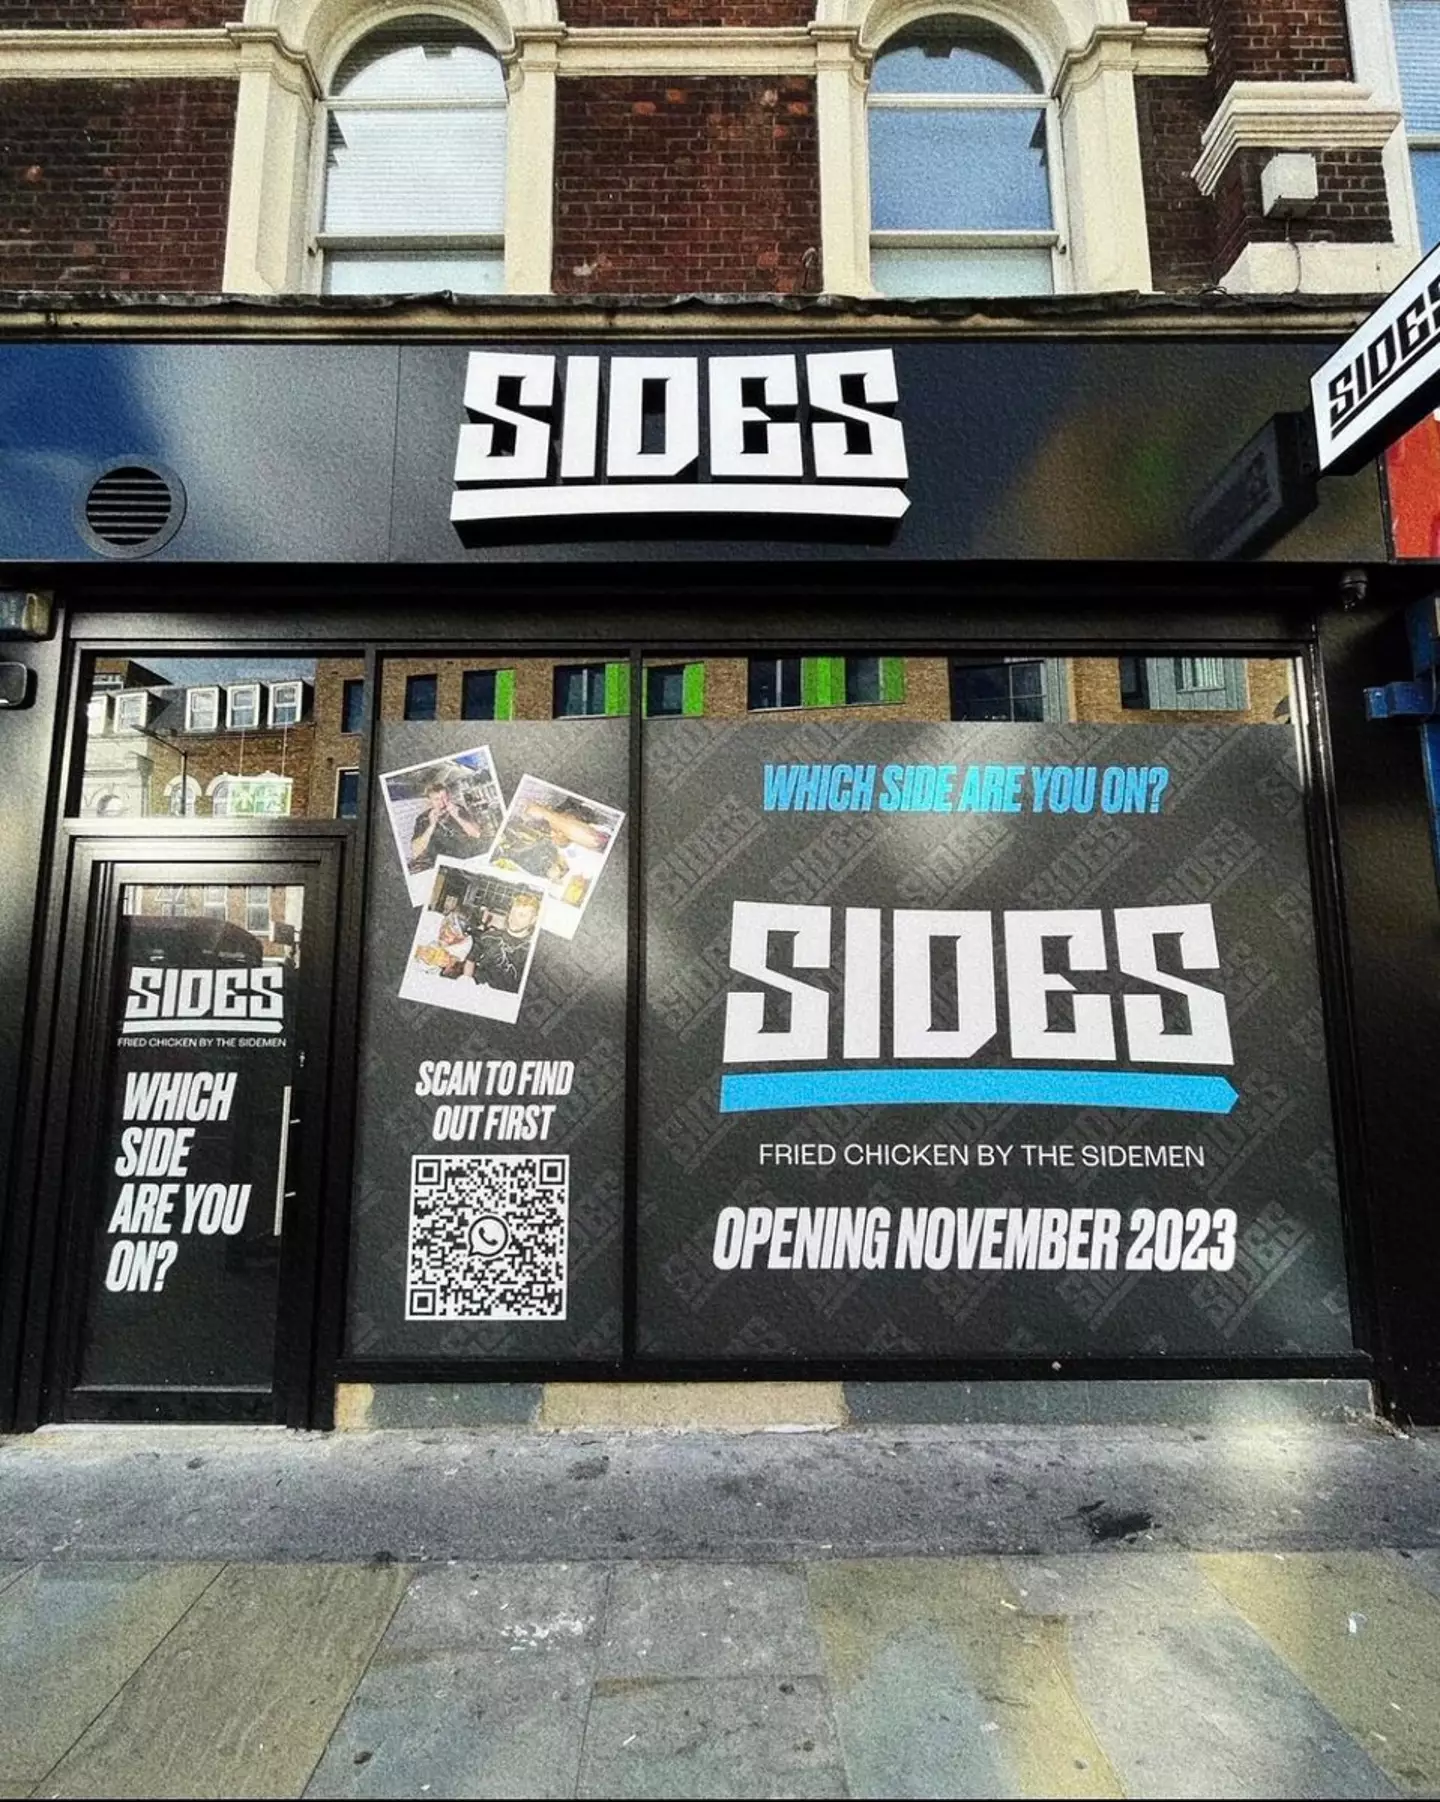 The Sidemen are still due to make an appearance at Sides Dalston.